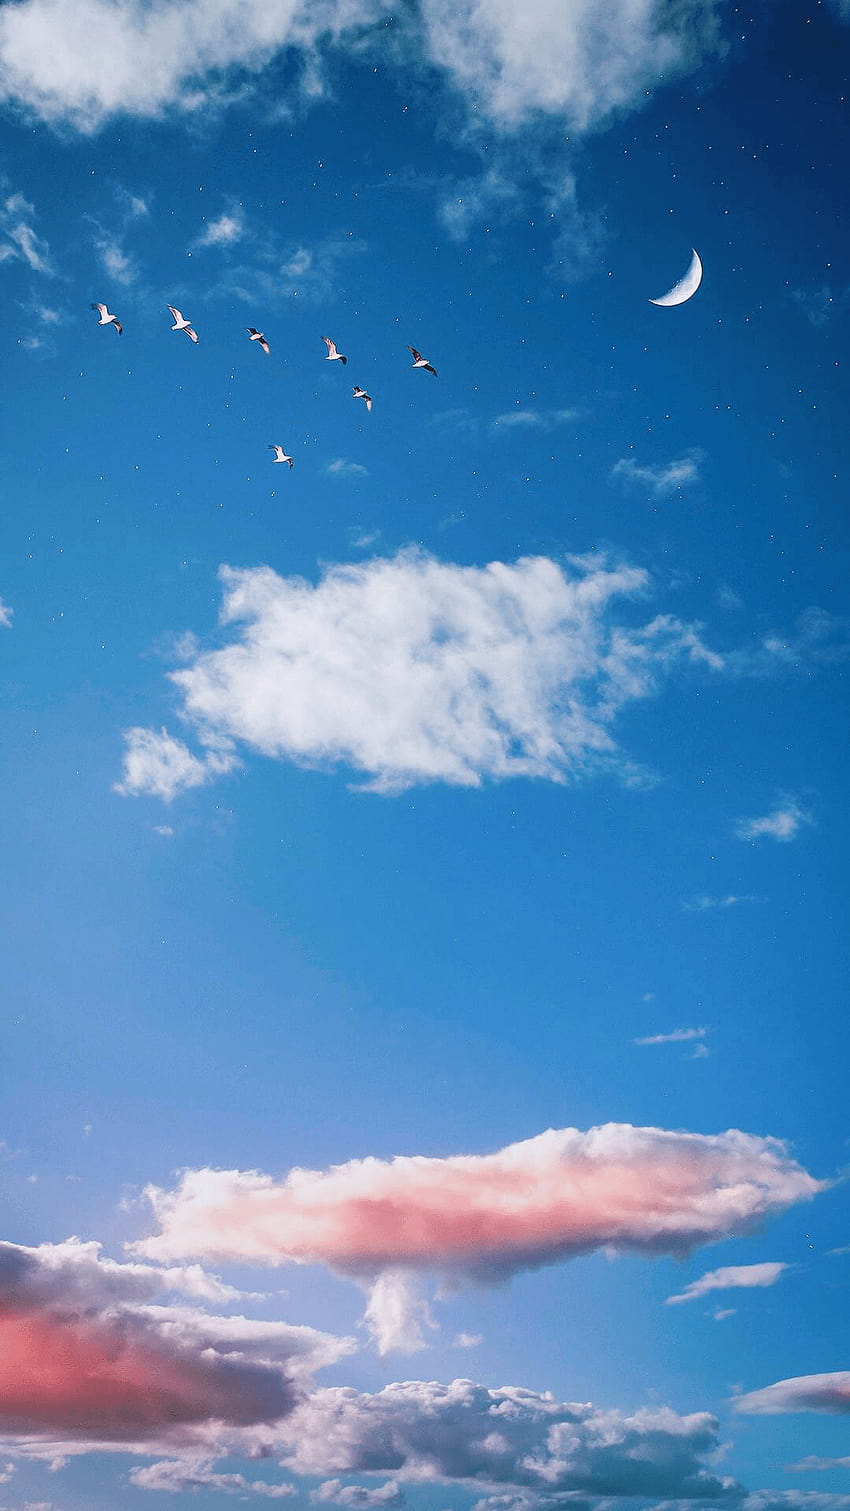 Tumblr Clouds posted by Ryan Johnson, cloudy tumblr HD phone wallpaper